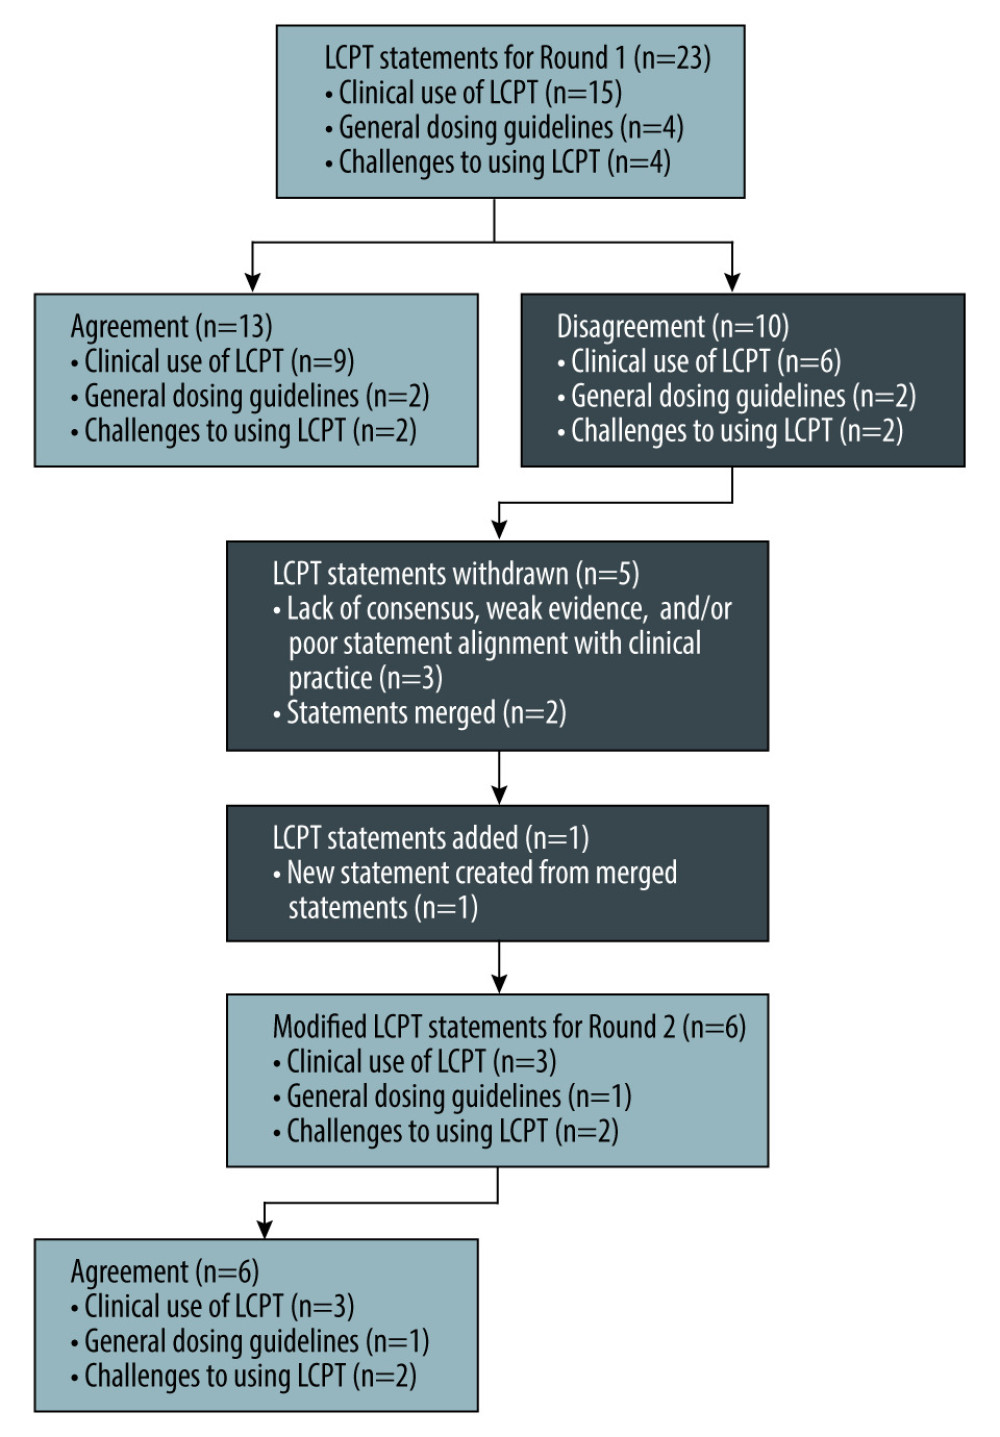 LCPT consensus statement flow chart. Software used for the creation of the figure: PowerPoint (version 2310, Microsoft). LCPT – once-daily extended-release oral tacrolimus.